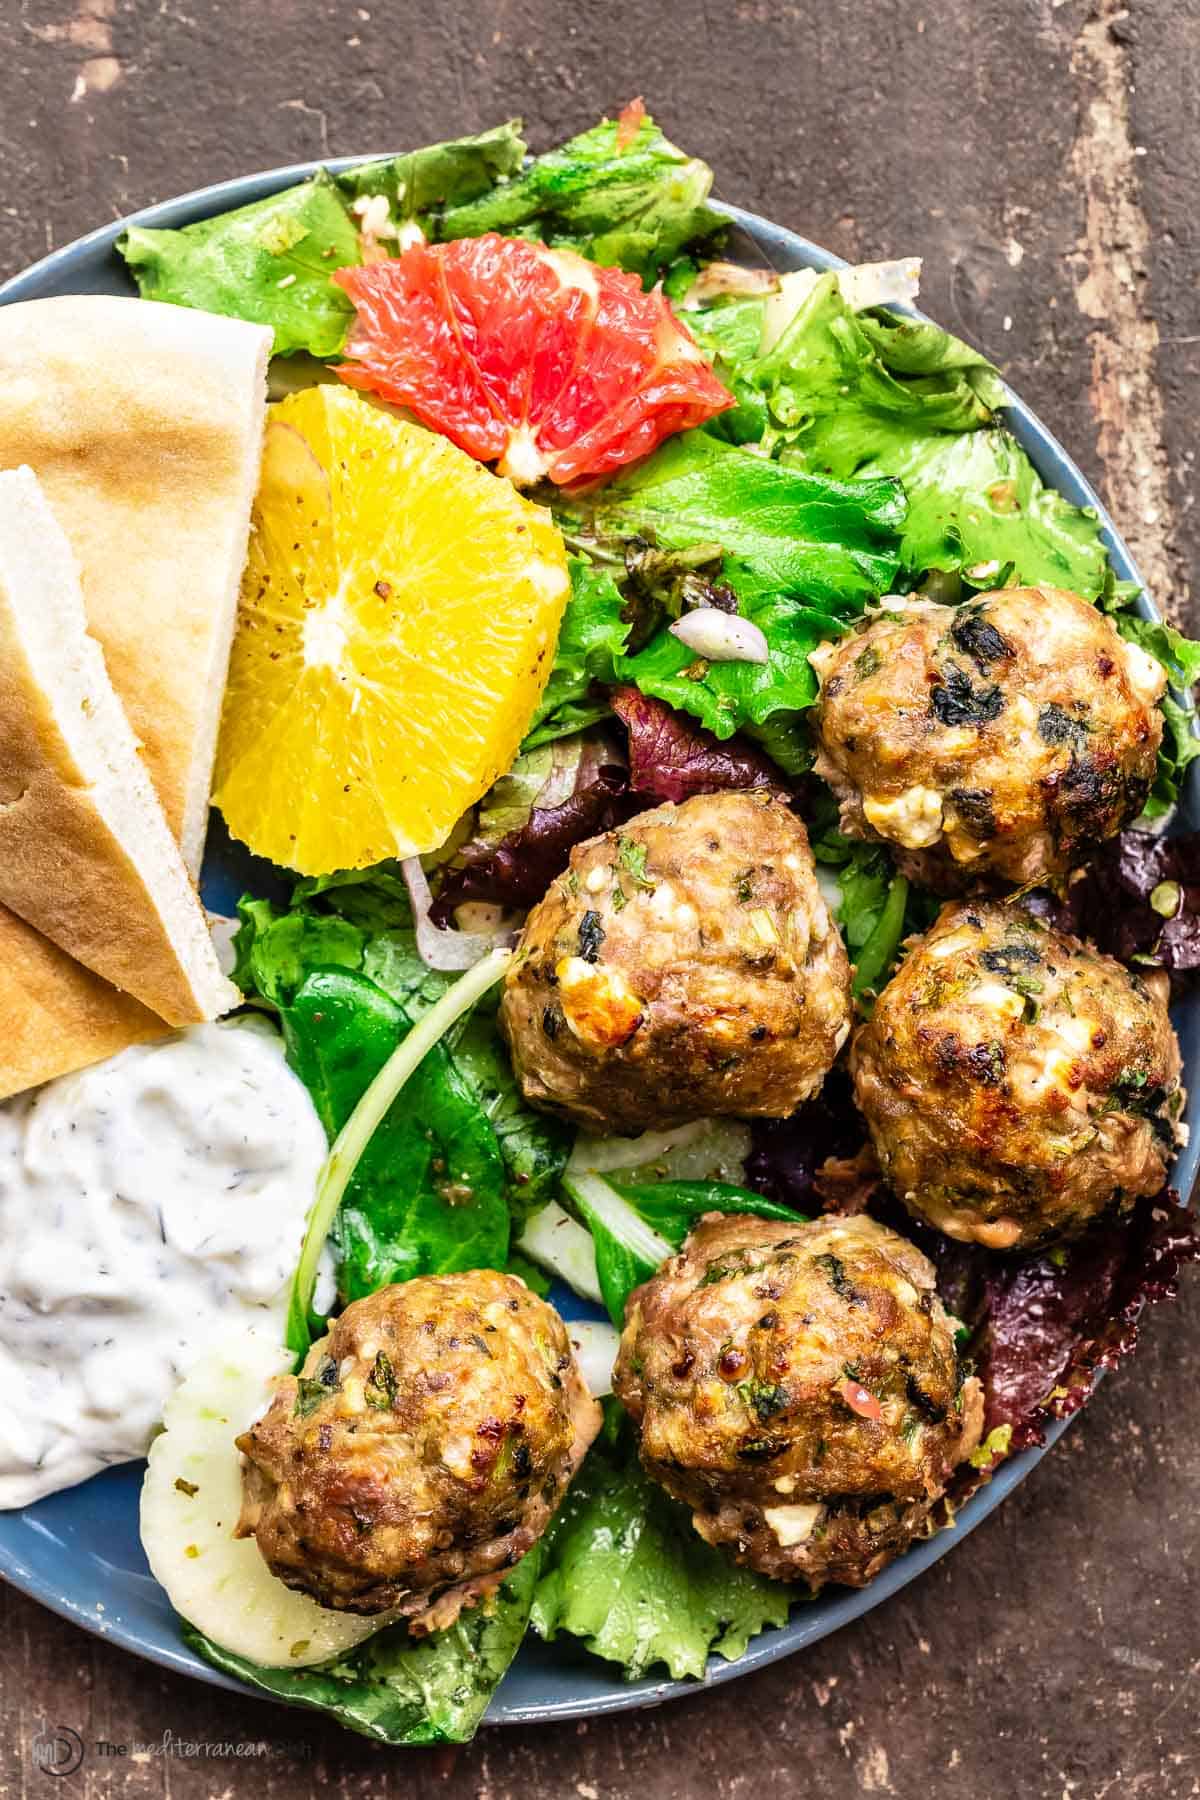 Baked turkey meatballs served on a blue plate over a salad with a side of tzatziki sauce and pita bread